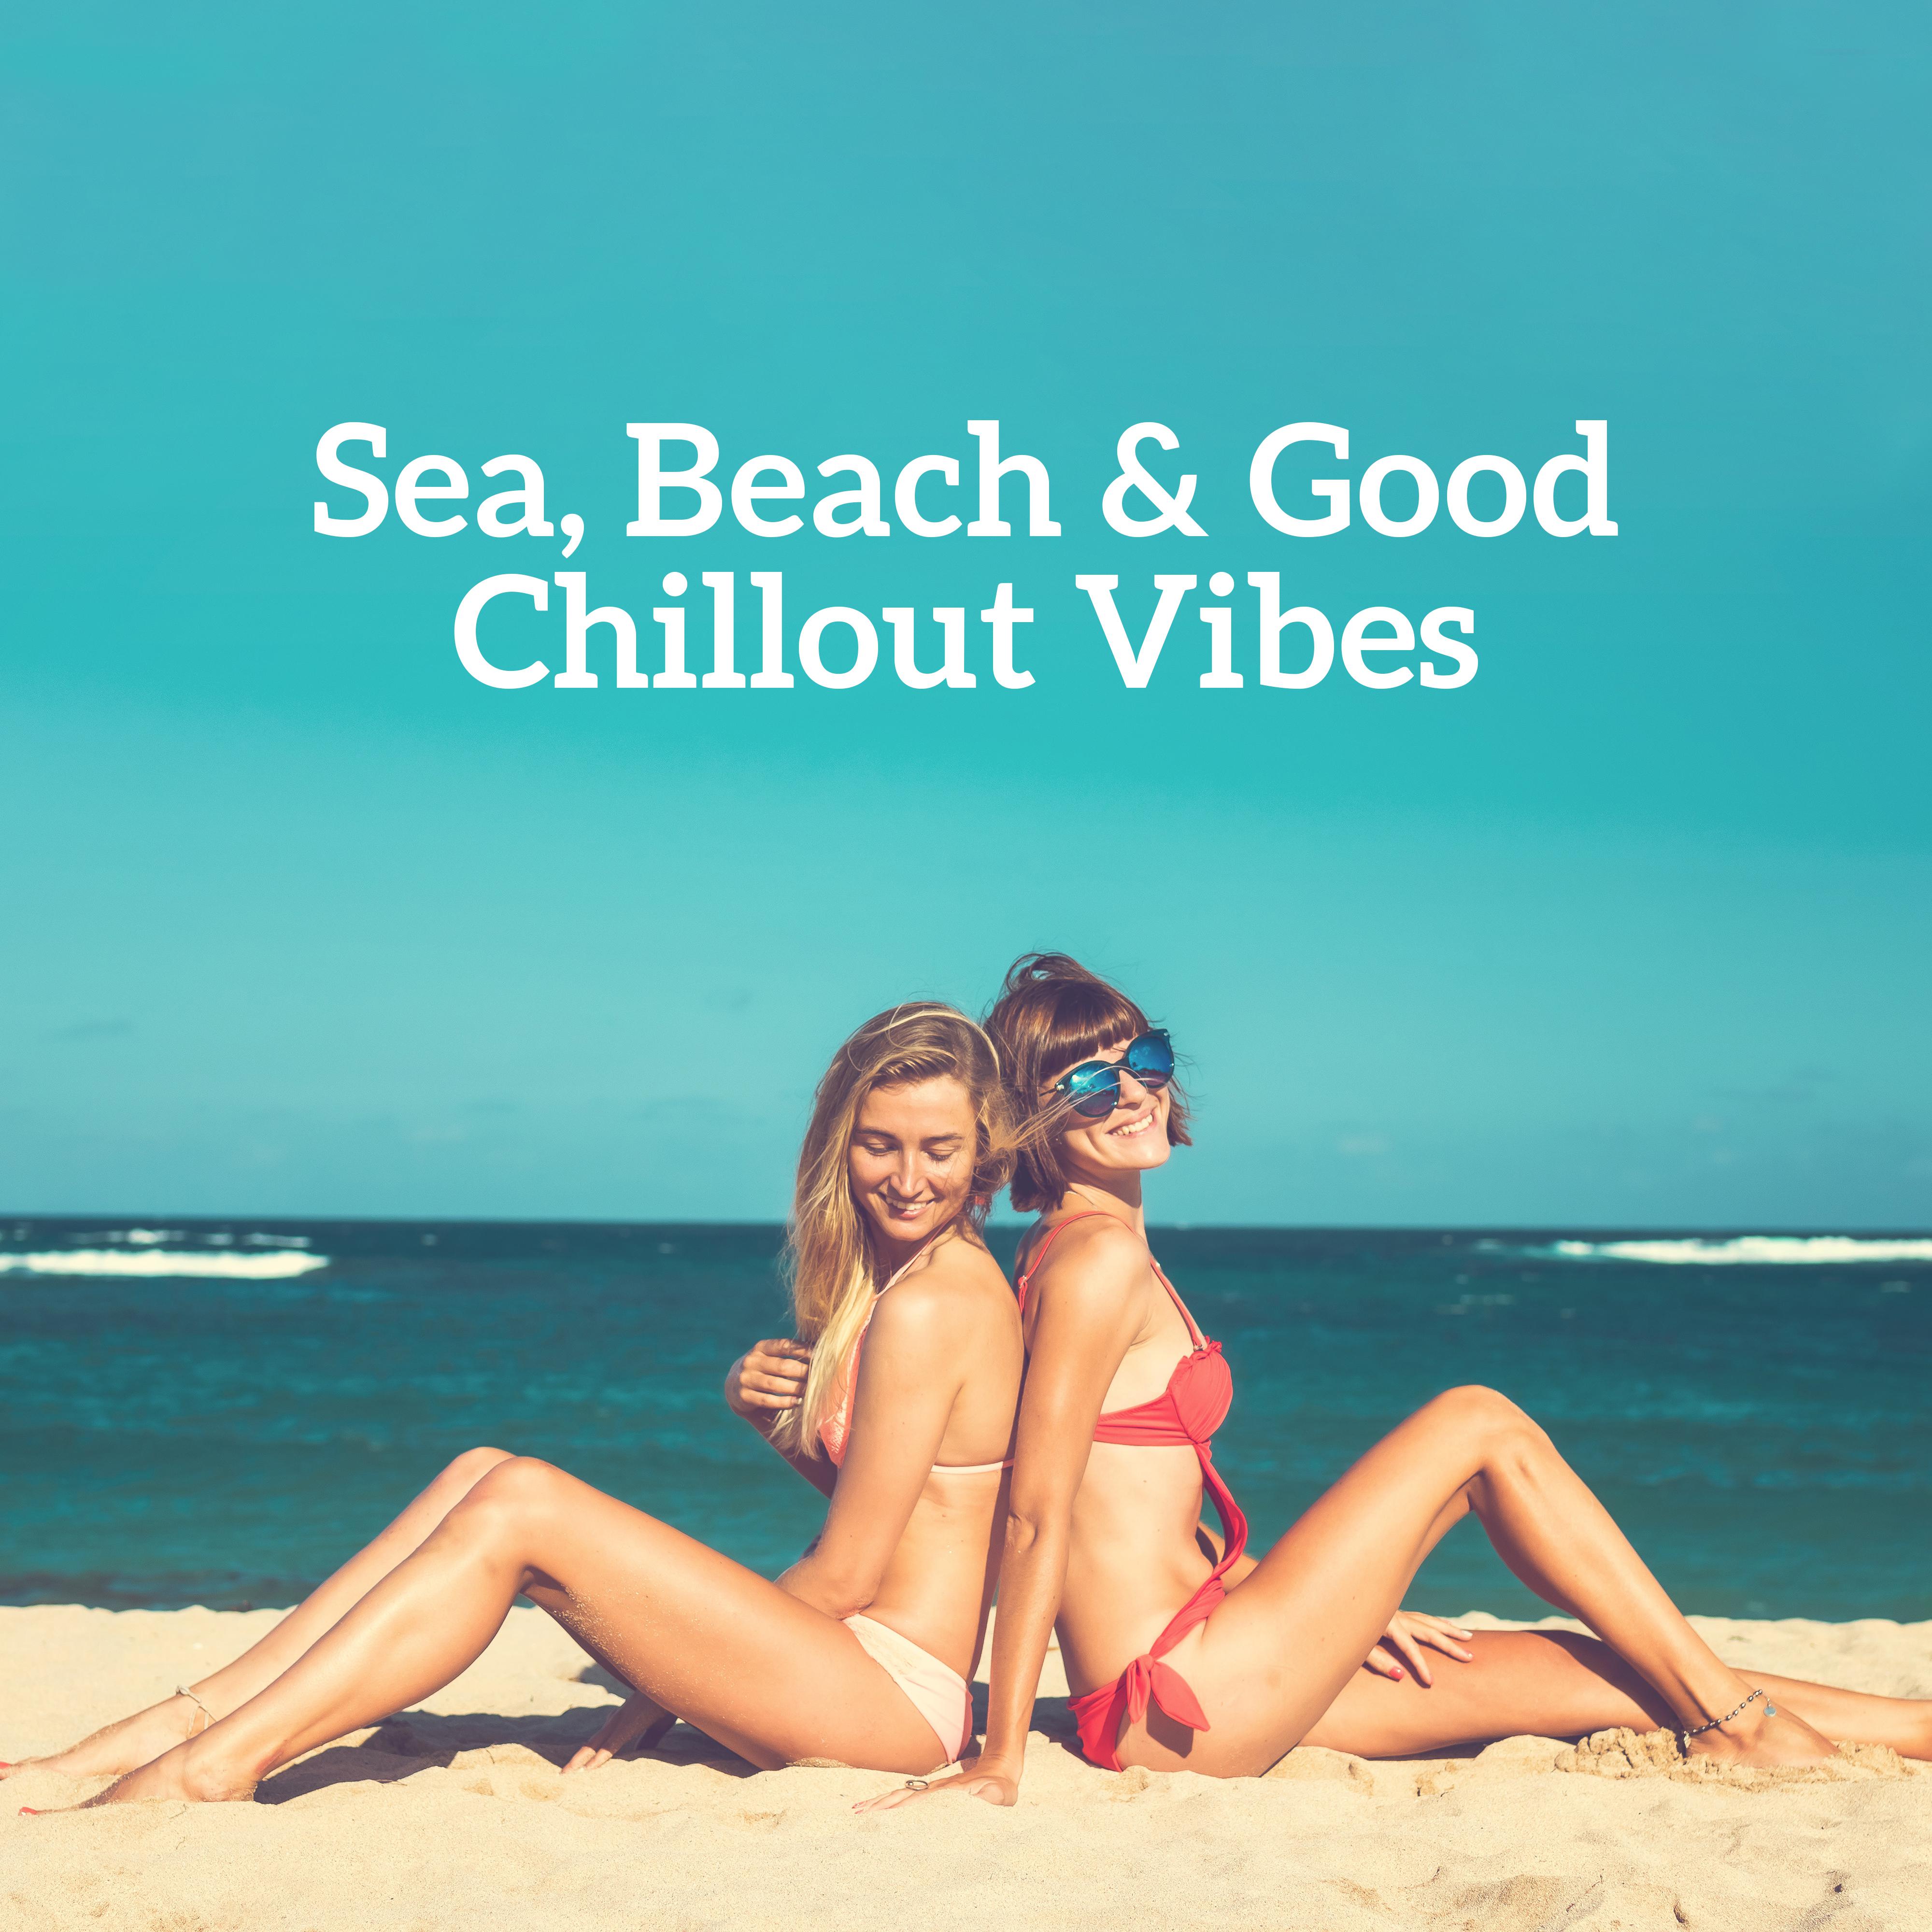 Sea, Beach  Good Chillout Vibes  2019 Chill Out Hot Summer Rhythms, Music Perfect for Holiday Relaxataion, Tropical Vacation Celebration Songs